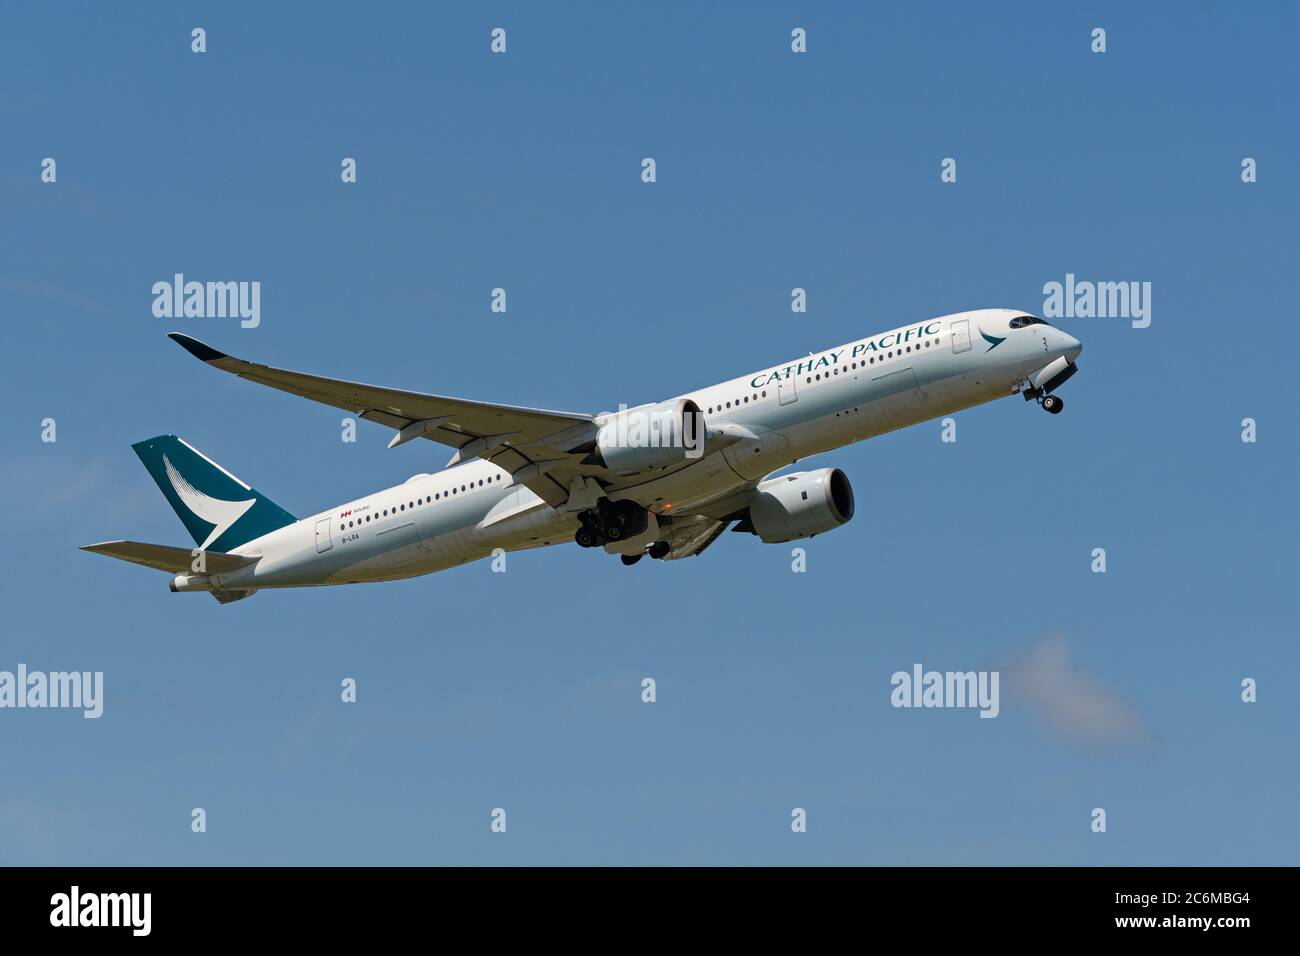 Richmond, British Columbia, Canada. 10th July, 2020. A Cathay Pacific Airways Airbus A350-900 (B-LRA) wide-body jet takes off from Vancouver International Airport on a flight from Vancouver to Hong Kong, July 10, 2020. Credit: Bayne Stanley/ZUMA Wire/Alamy Live News Stock Photo